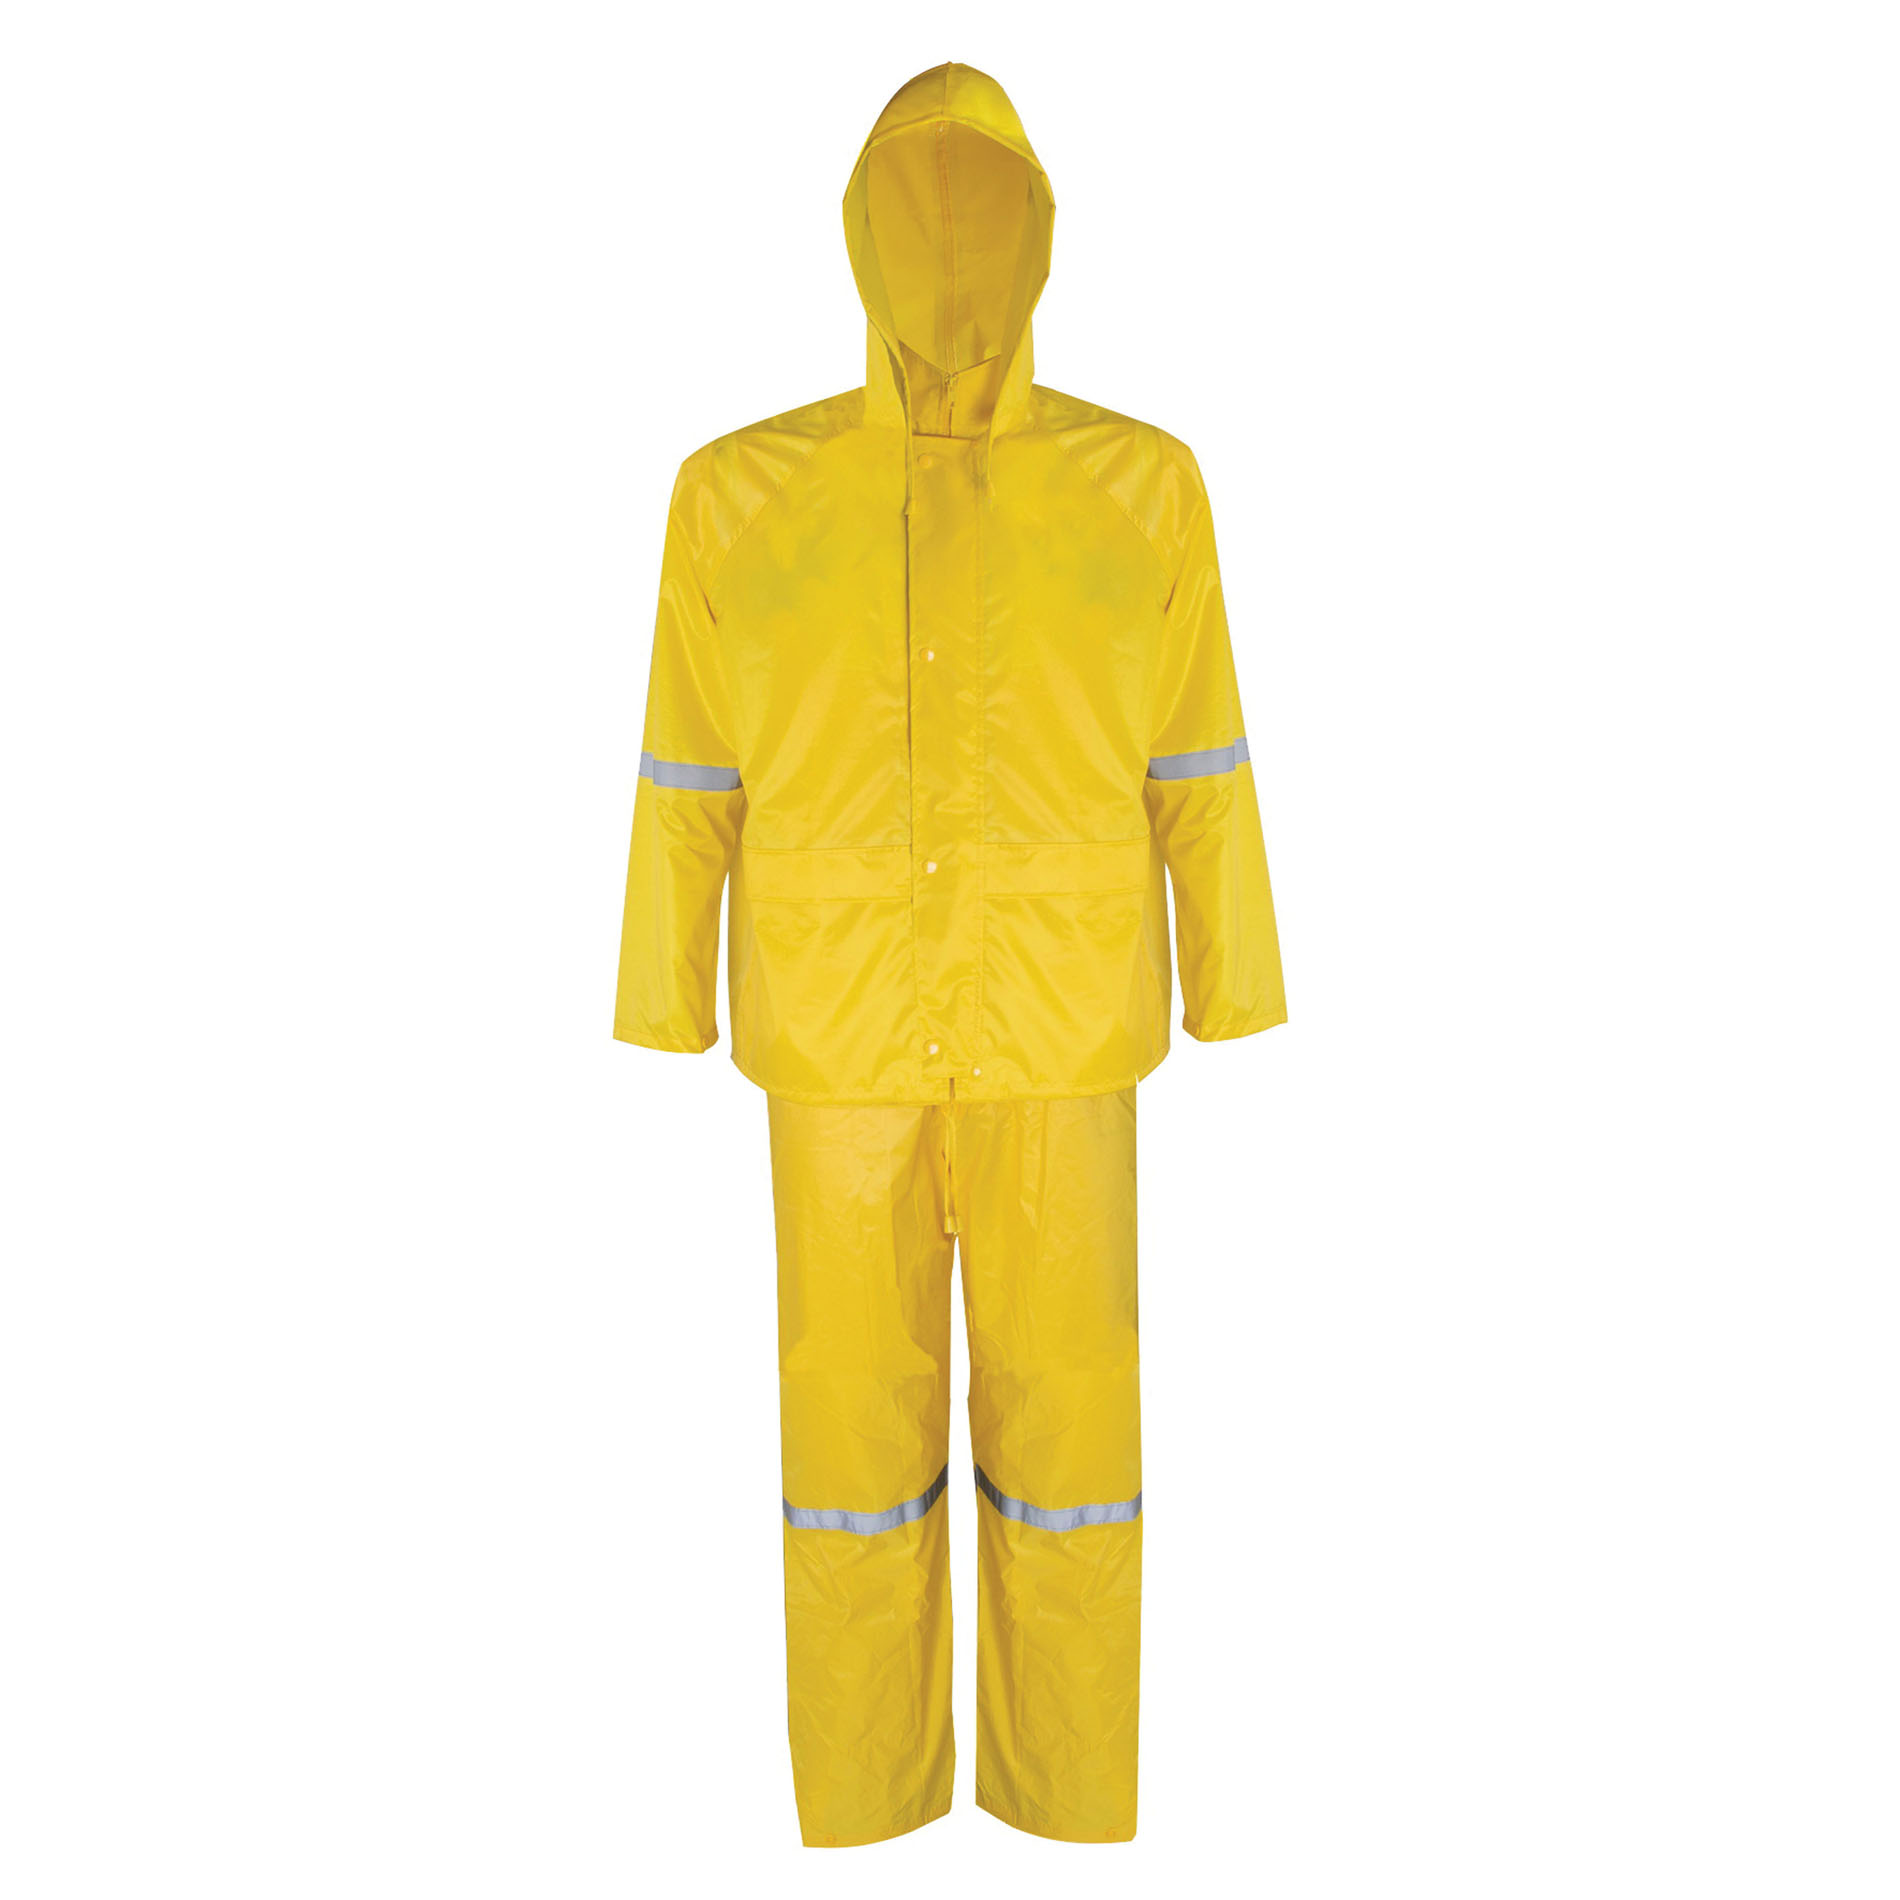 RS3-01-M Rain Suit, M, 41 in Inseam, Polyester, Yellow, Concealed Collar, Zipper with Storm Flap Closure